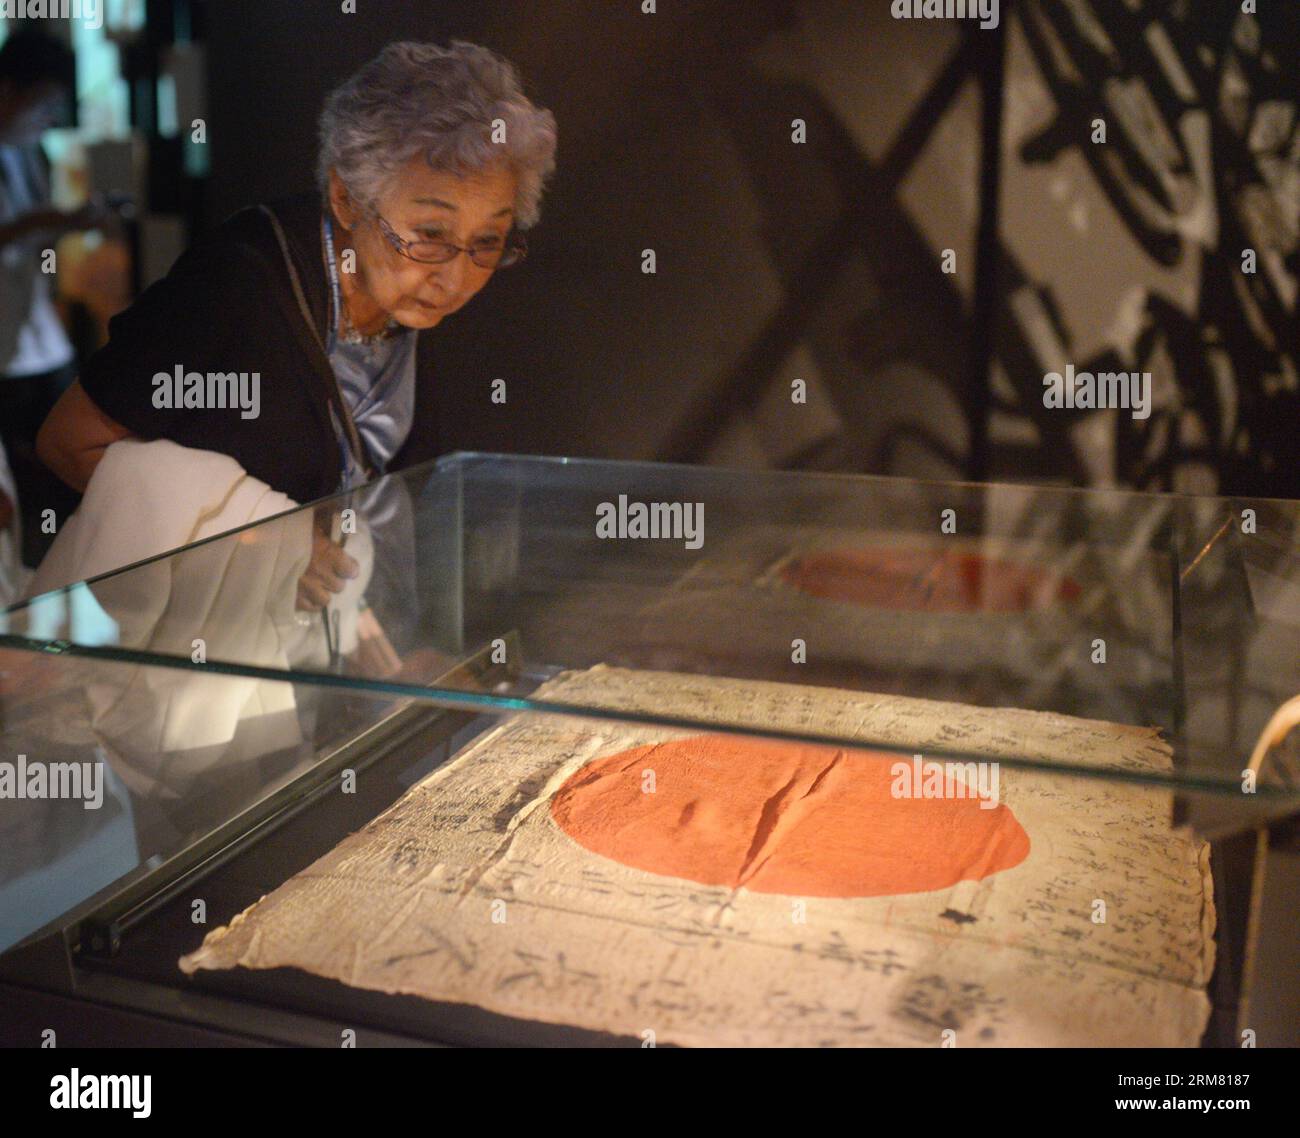 A surviving victim of the atomic bombings of Hiroshima and Nagasaki visit the Singapore National Museum in Singapore, March 23, 2014. (Xinhua/Then Chih Wey) SINGAPORE-JAPAN-ATOMIC BOMB SURVIVOR PUBLICATIONxNOTxINxCHN   a SURVIVING Victim of The Atomic bombings of Hiroshima and Nagasaki Visit The Singapore National Museum in Singapore March 23 2014 XINHUA Then Chih Wey Singapore Japan Atomic Bomb Survivor PUBLICATIONxNOTxINxCHN Stock Photo